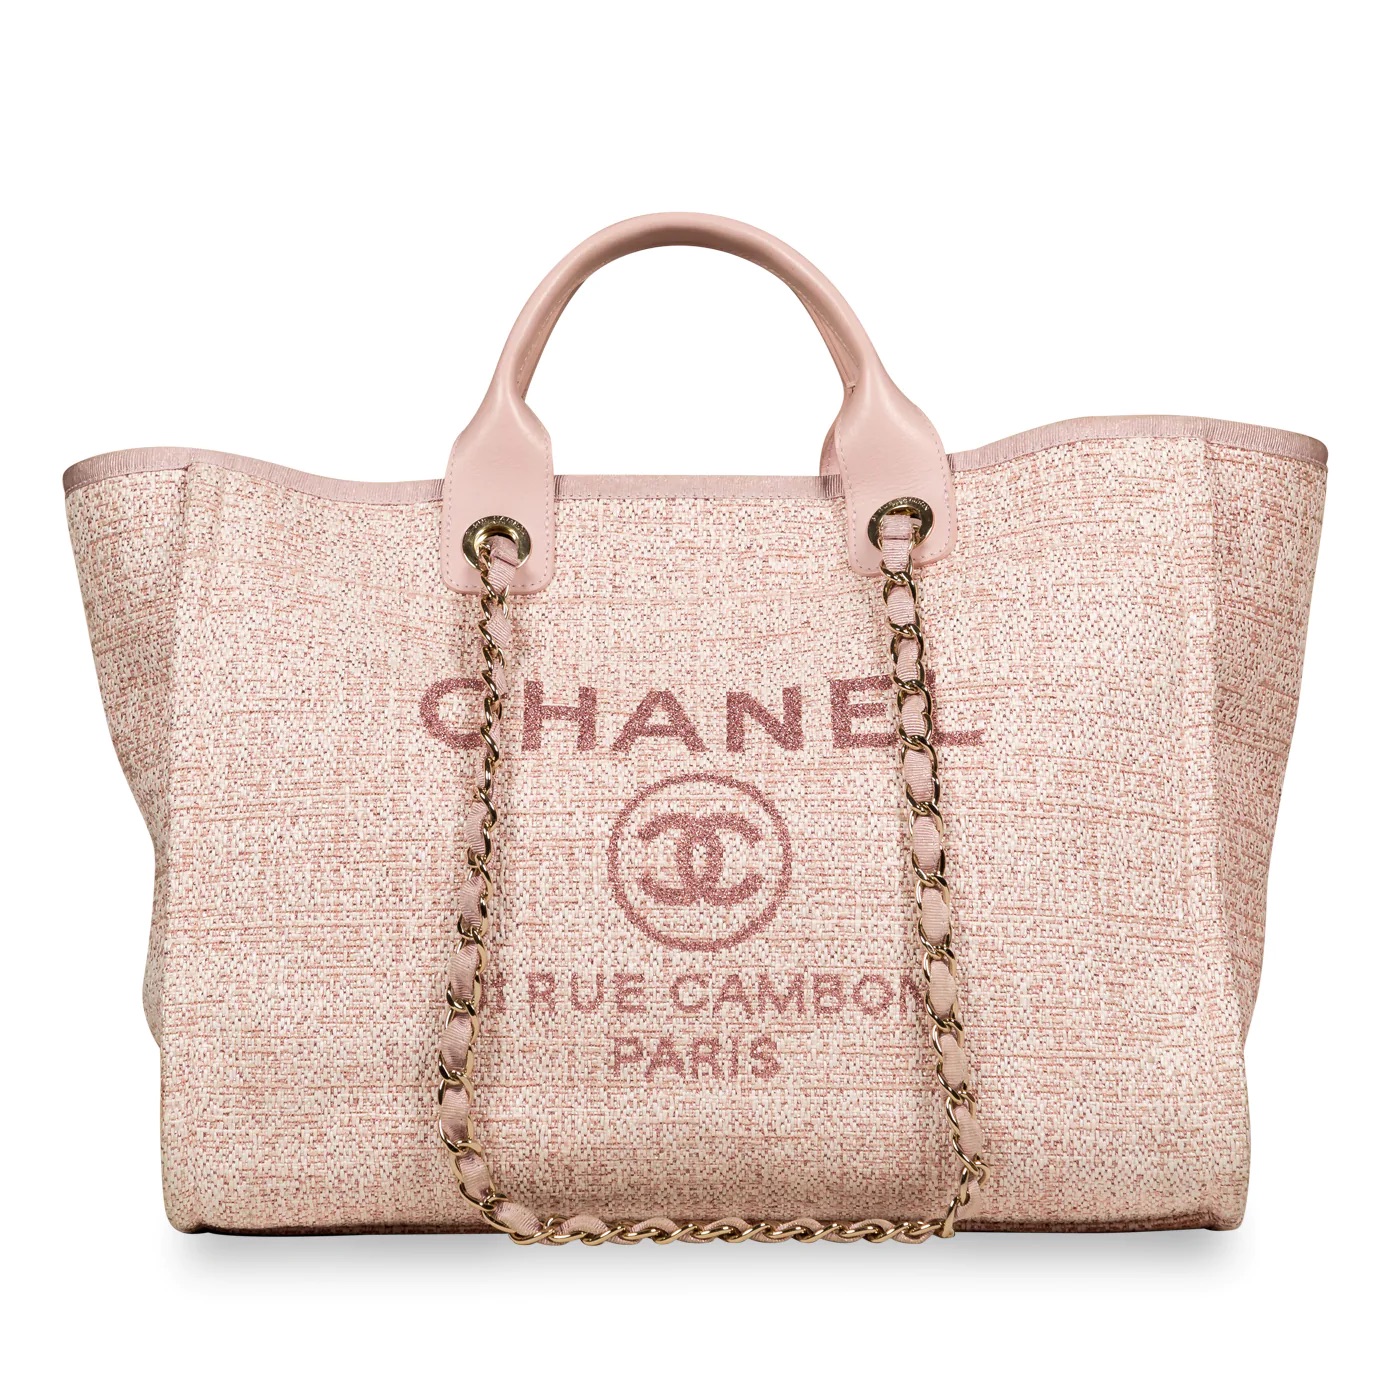 Bag Battles: Chanel Deauville Tote Vs Chanel Shopping Tote - luxfy